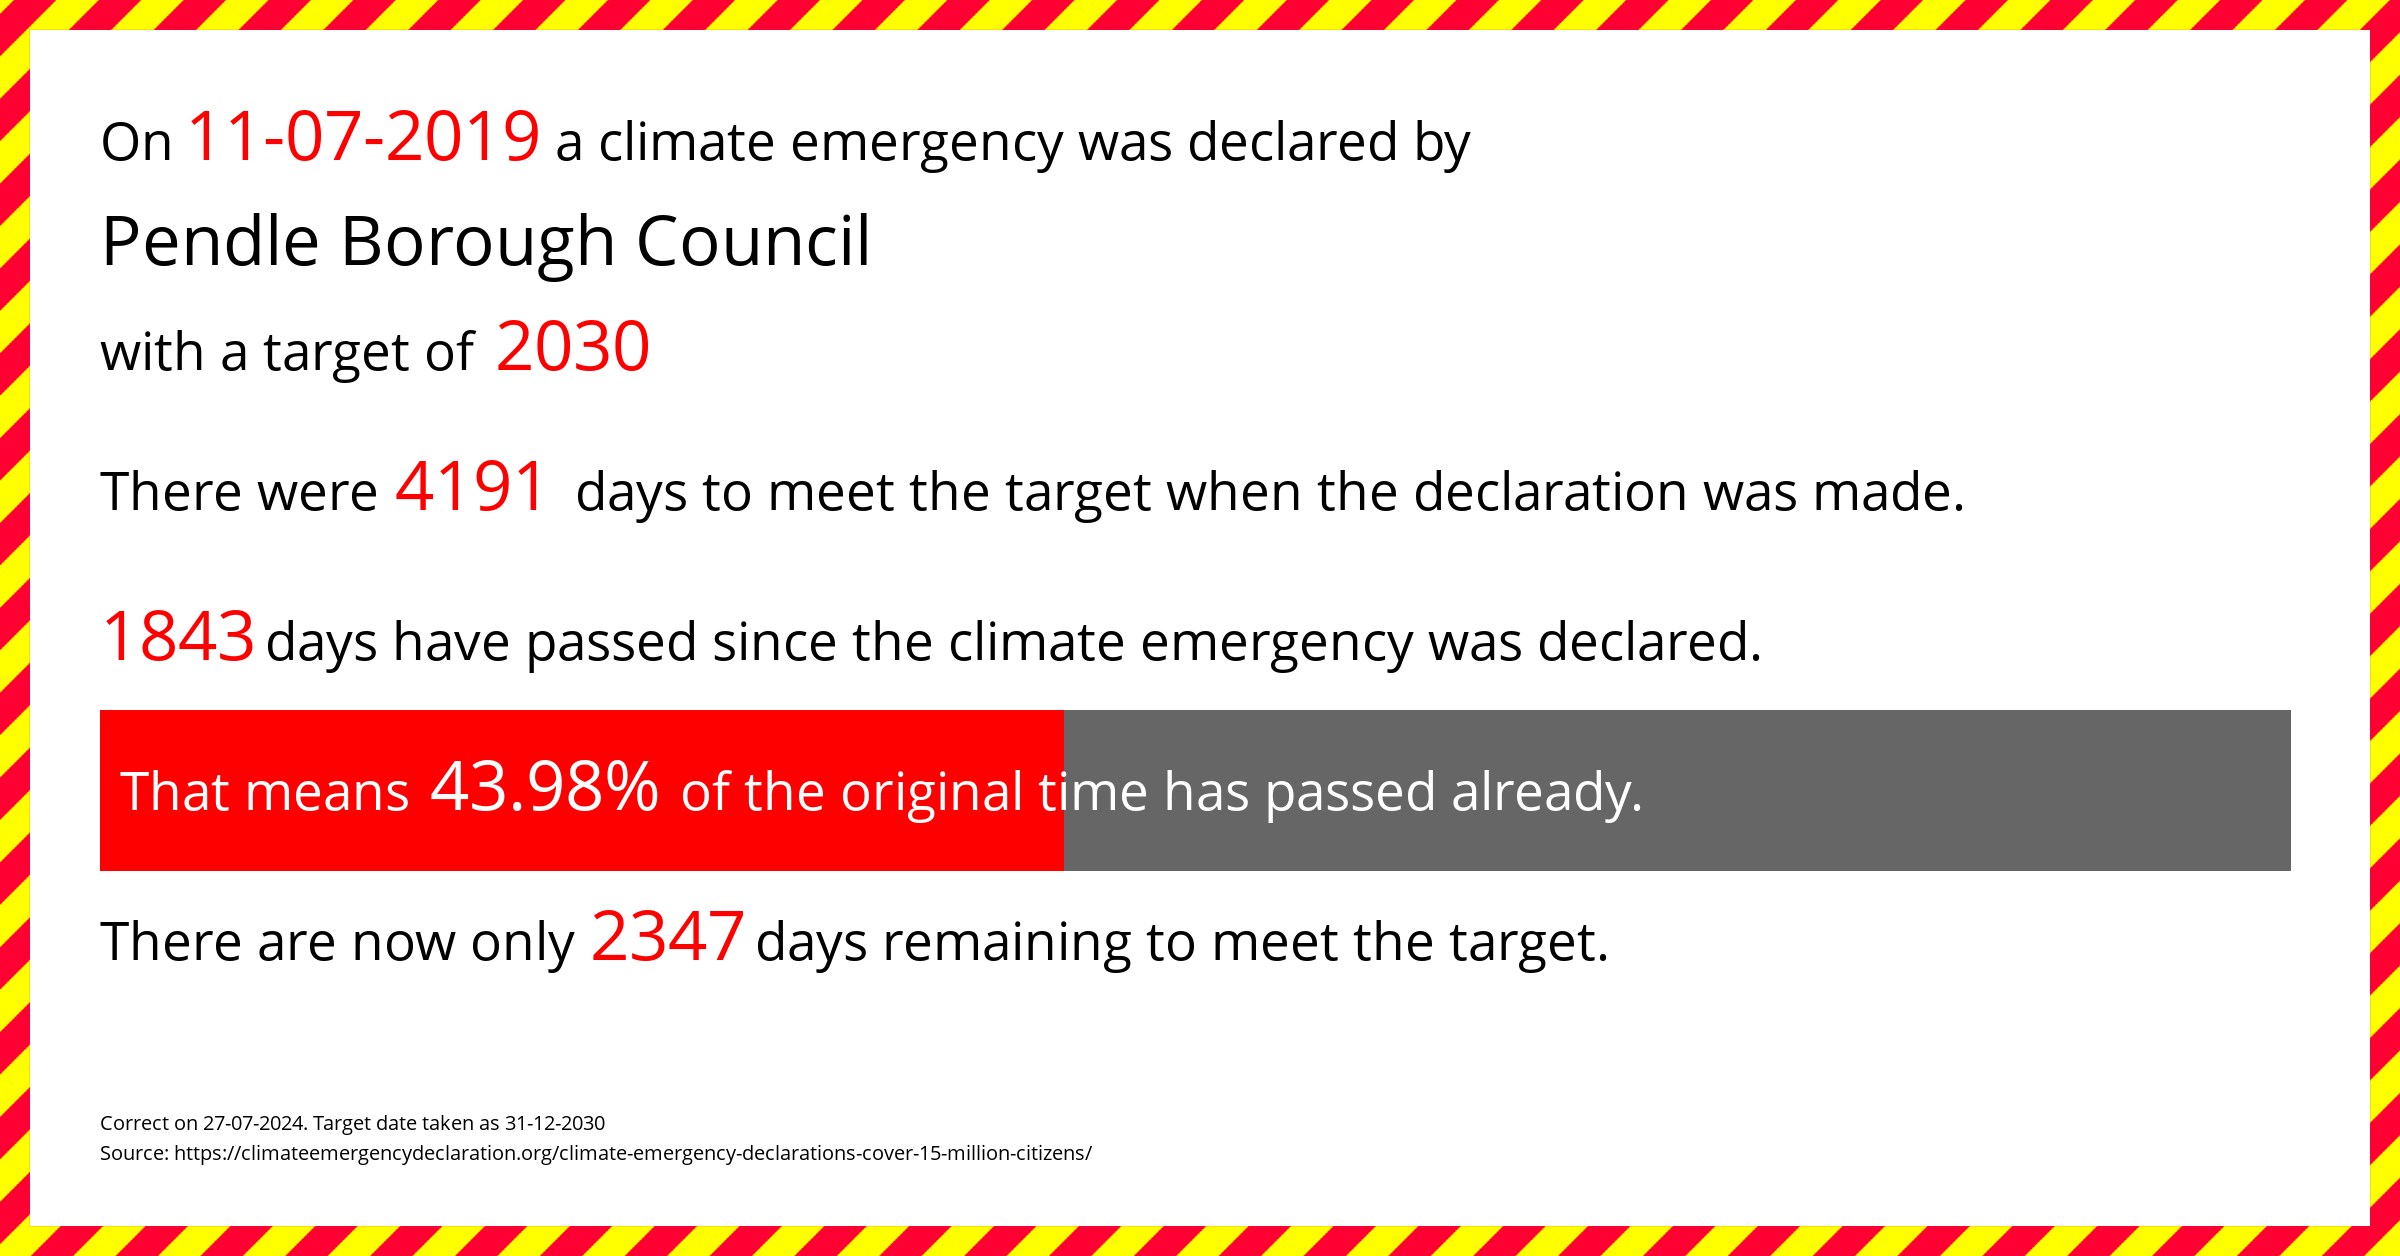 Pendle Borough Council declared a Climate emergency on Thursday 11th July 2019, with a target of 2030.